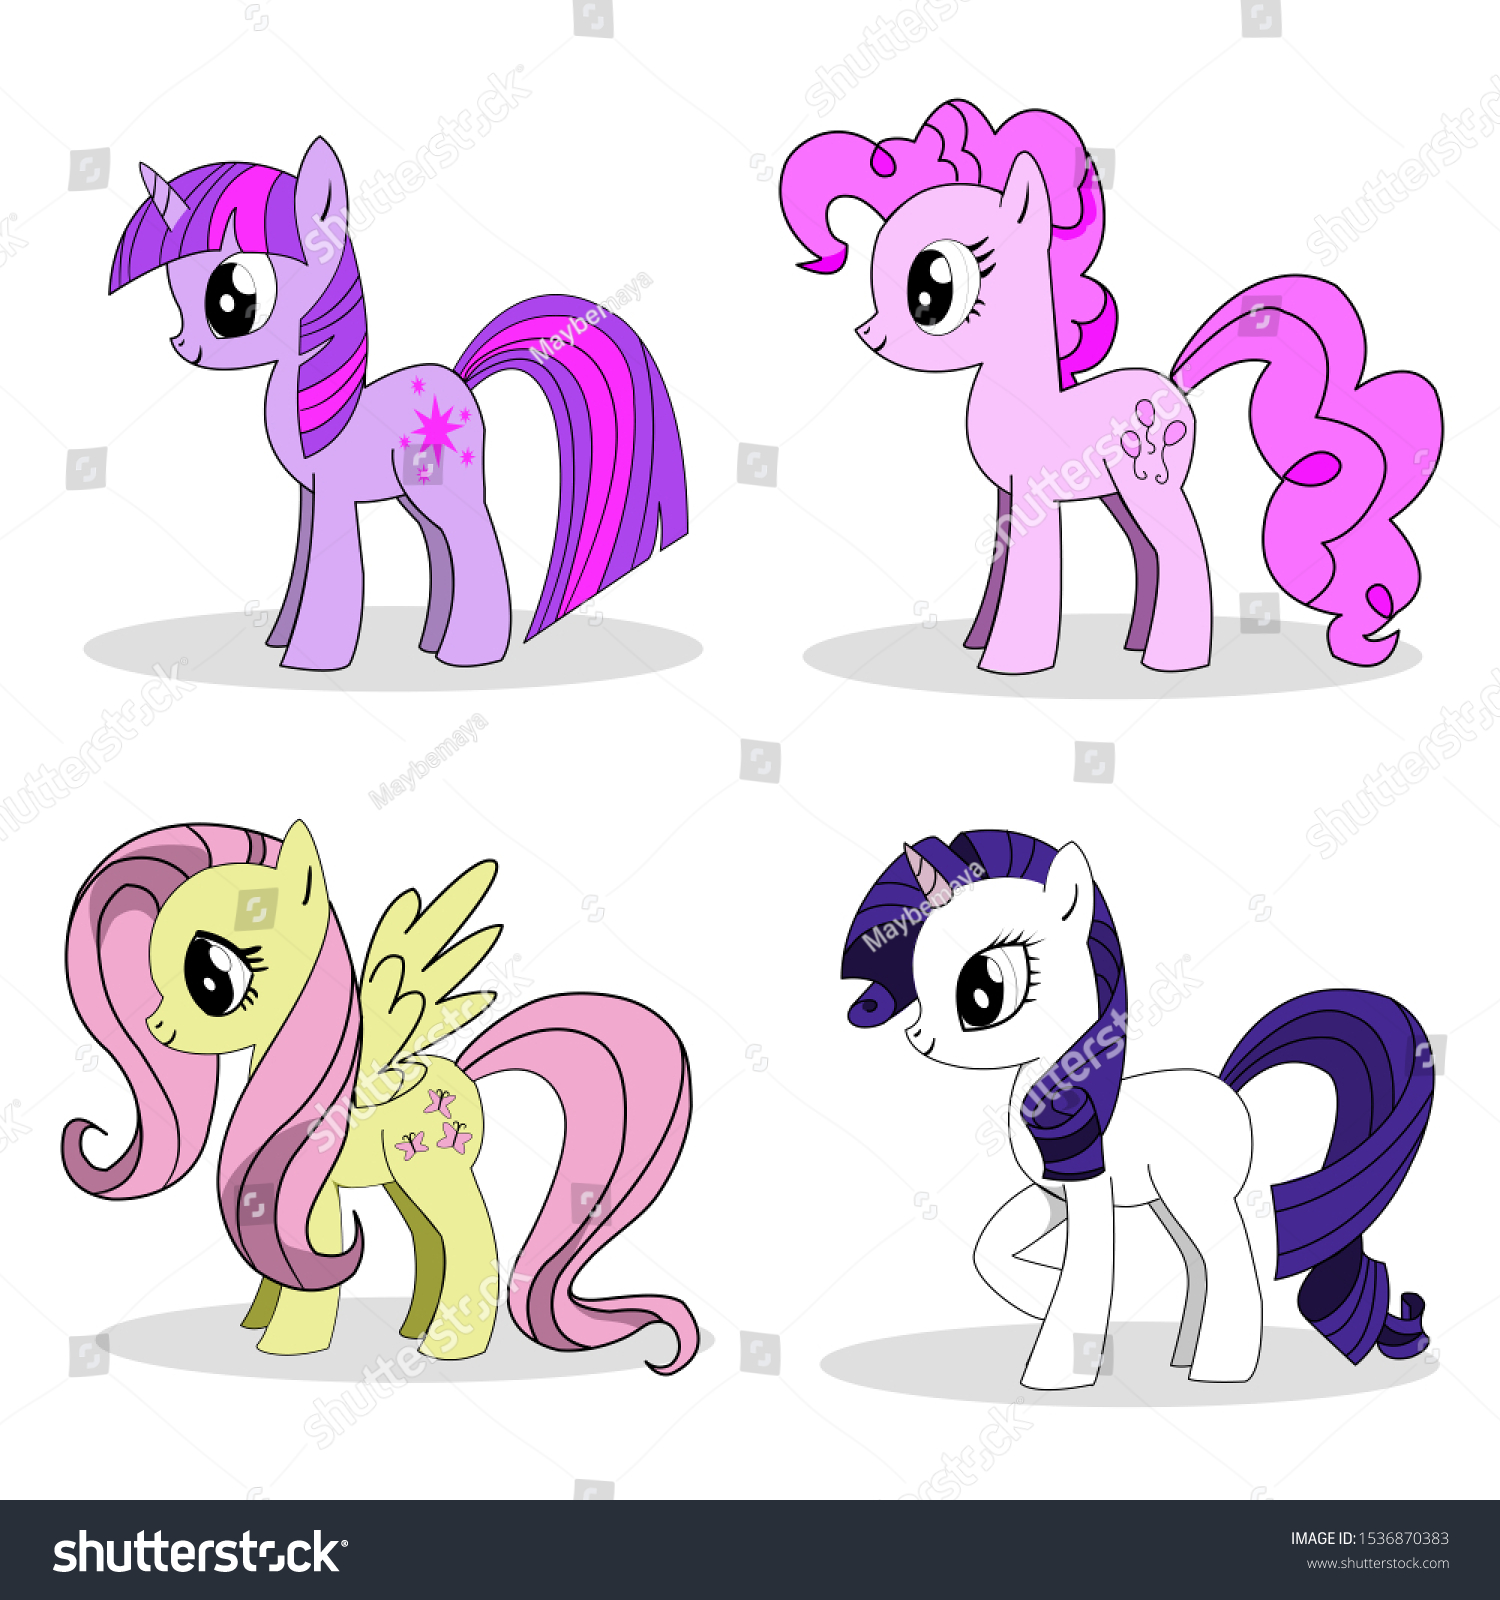 SVG of Set of colorful little cute hand drawn cartoon character pony and unicorn isolated on white background. my little pony friendship. svg